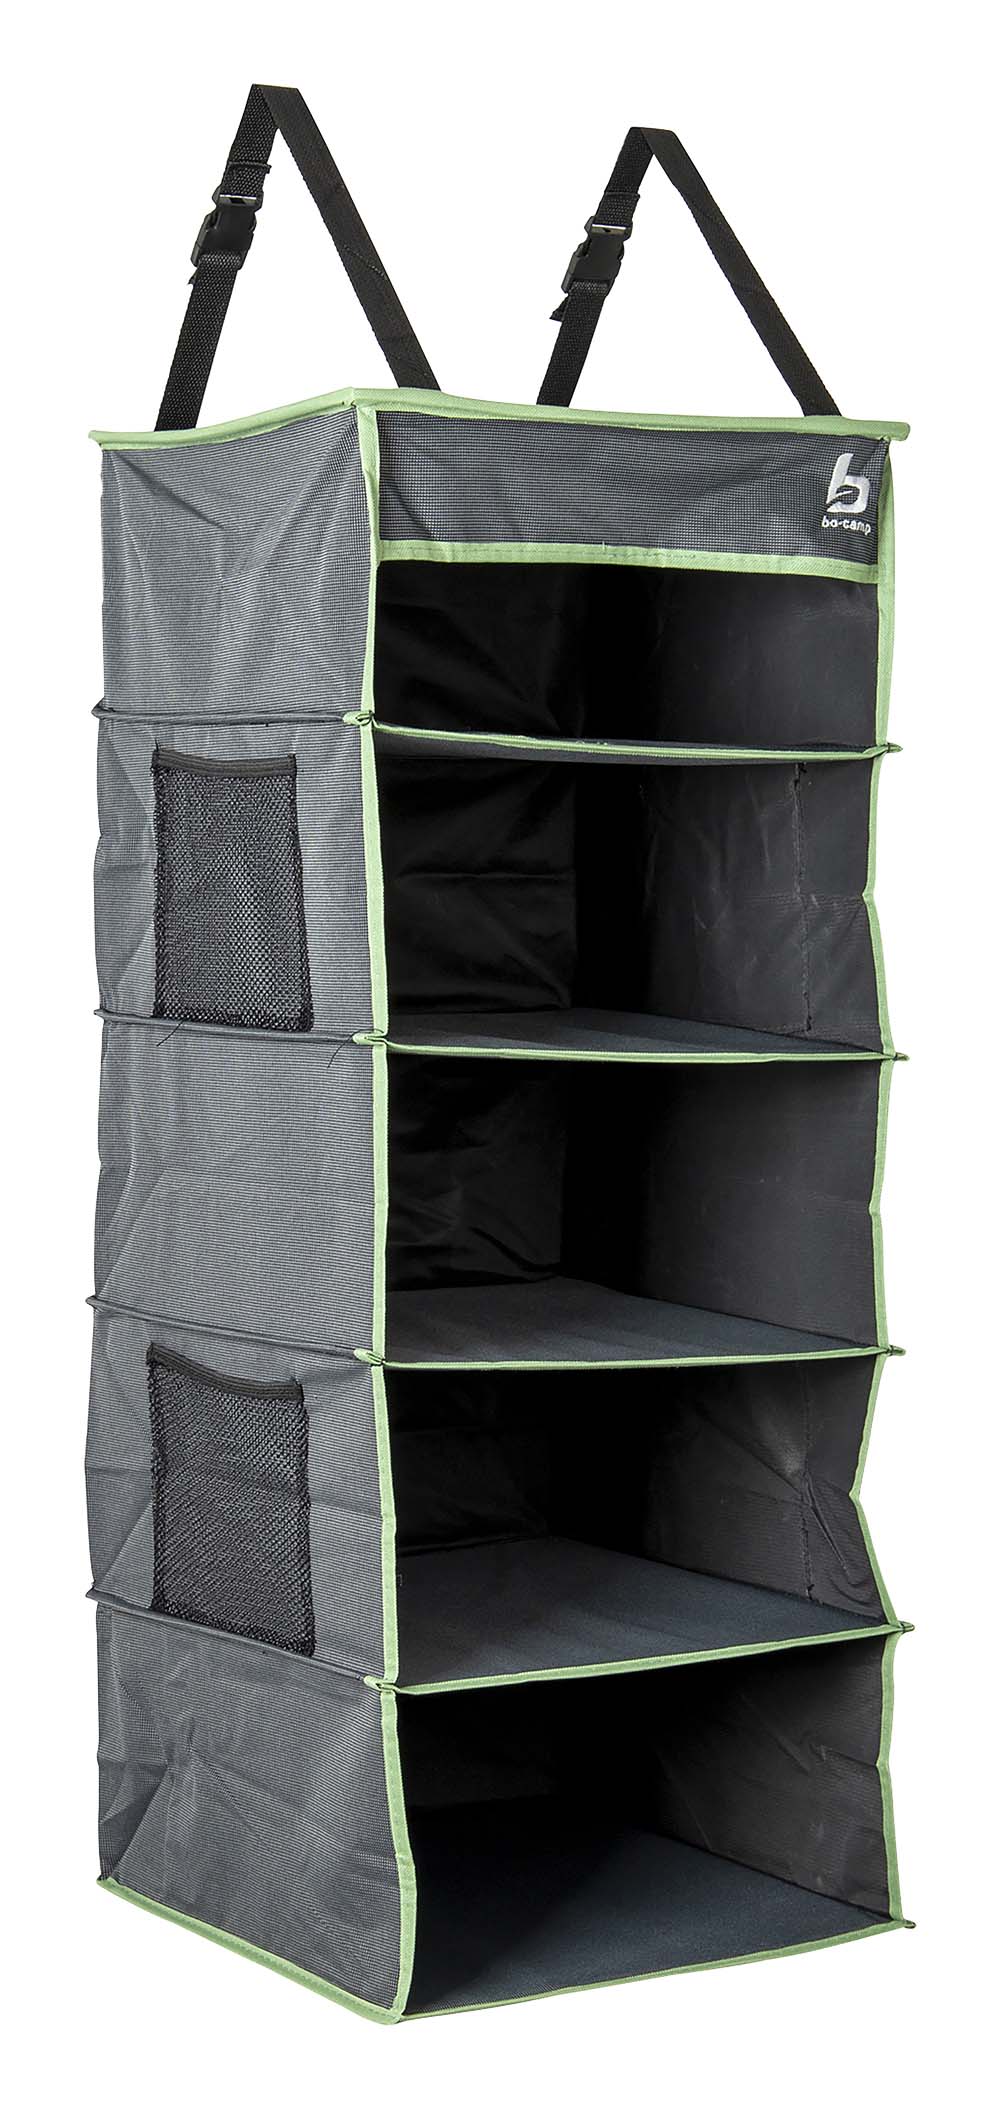 1709370 A 5 compartment hanging wardrobe. Has 5 compartments where you can optionally place a drawer (not included). Simple, and can be mounted in various ways. This organiser can be hung with straps to a tent pole. The loops at the bottom provide additional fixation. Made of an extra sturdy Two-Tone 600D Oxford Polyester.